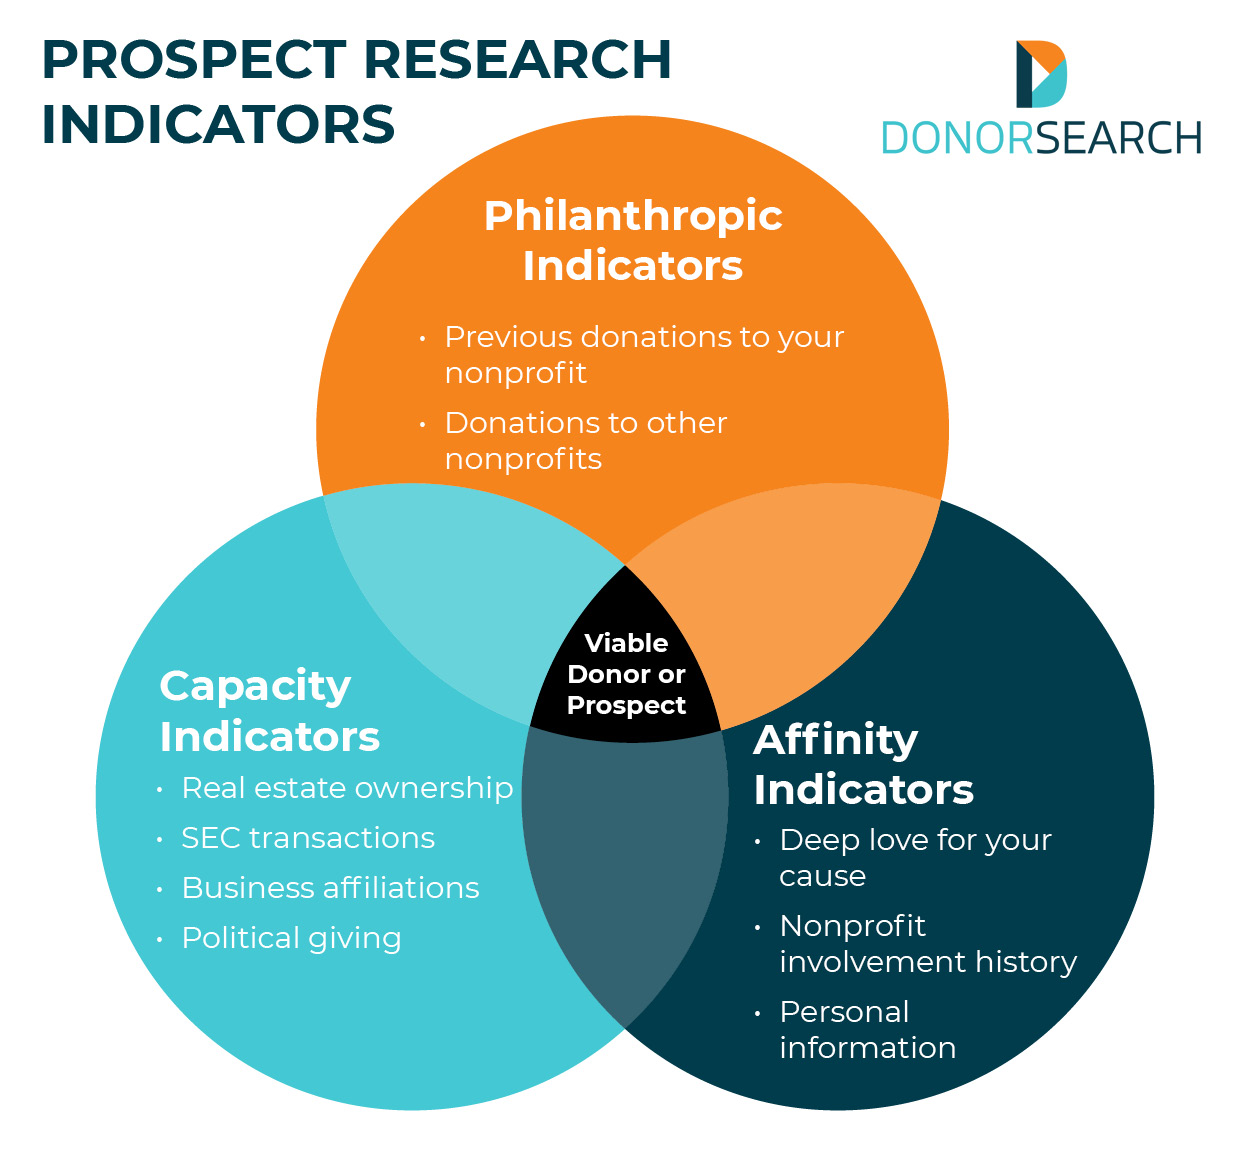 A Venn diagram showing the three types of prospect research indicators important to major donor fundraising, which are listed below.